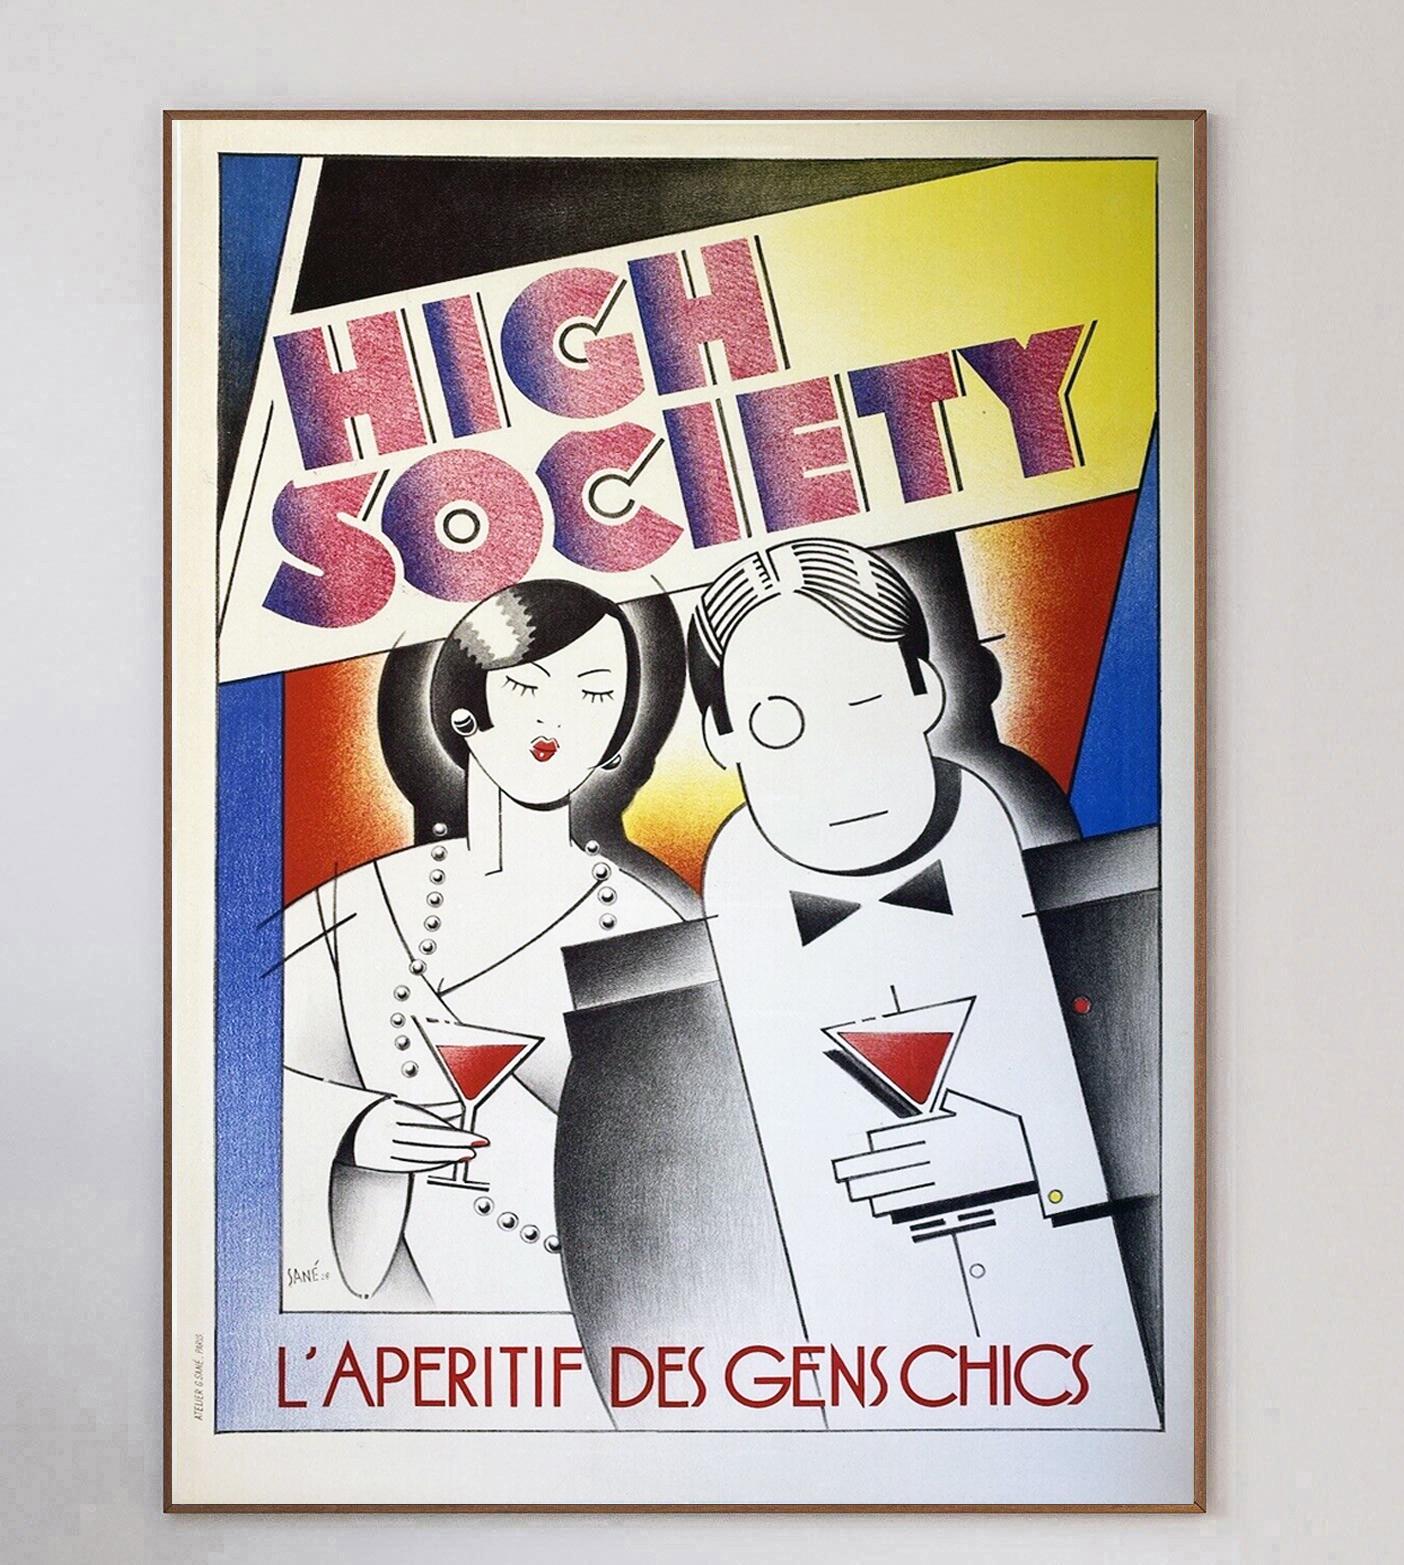 Stunning art deco poster created in 1928 for High Society Aperitif. Reading 